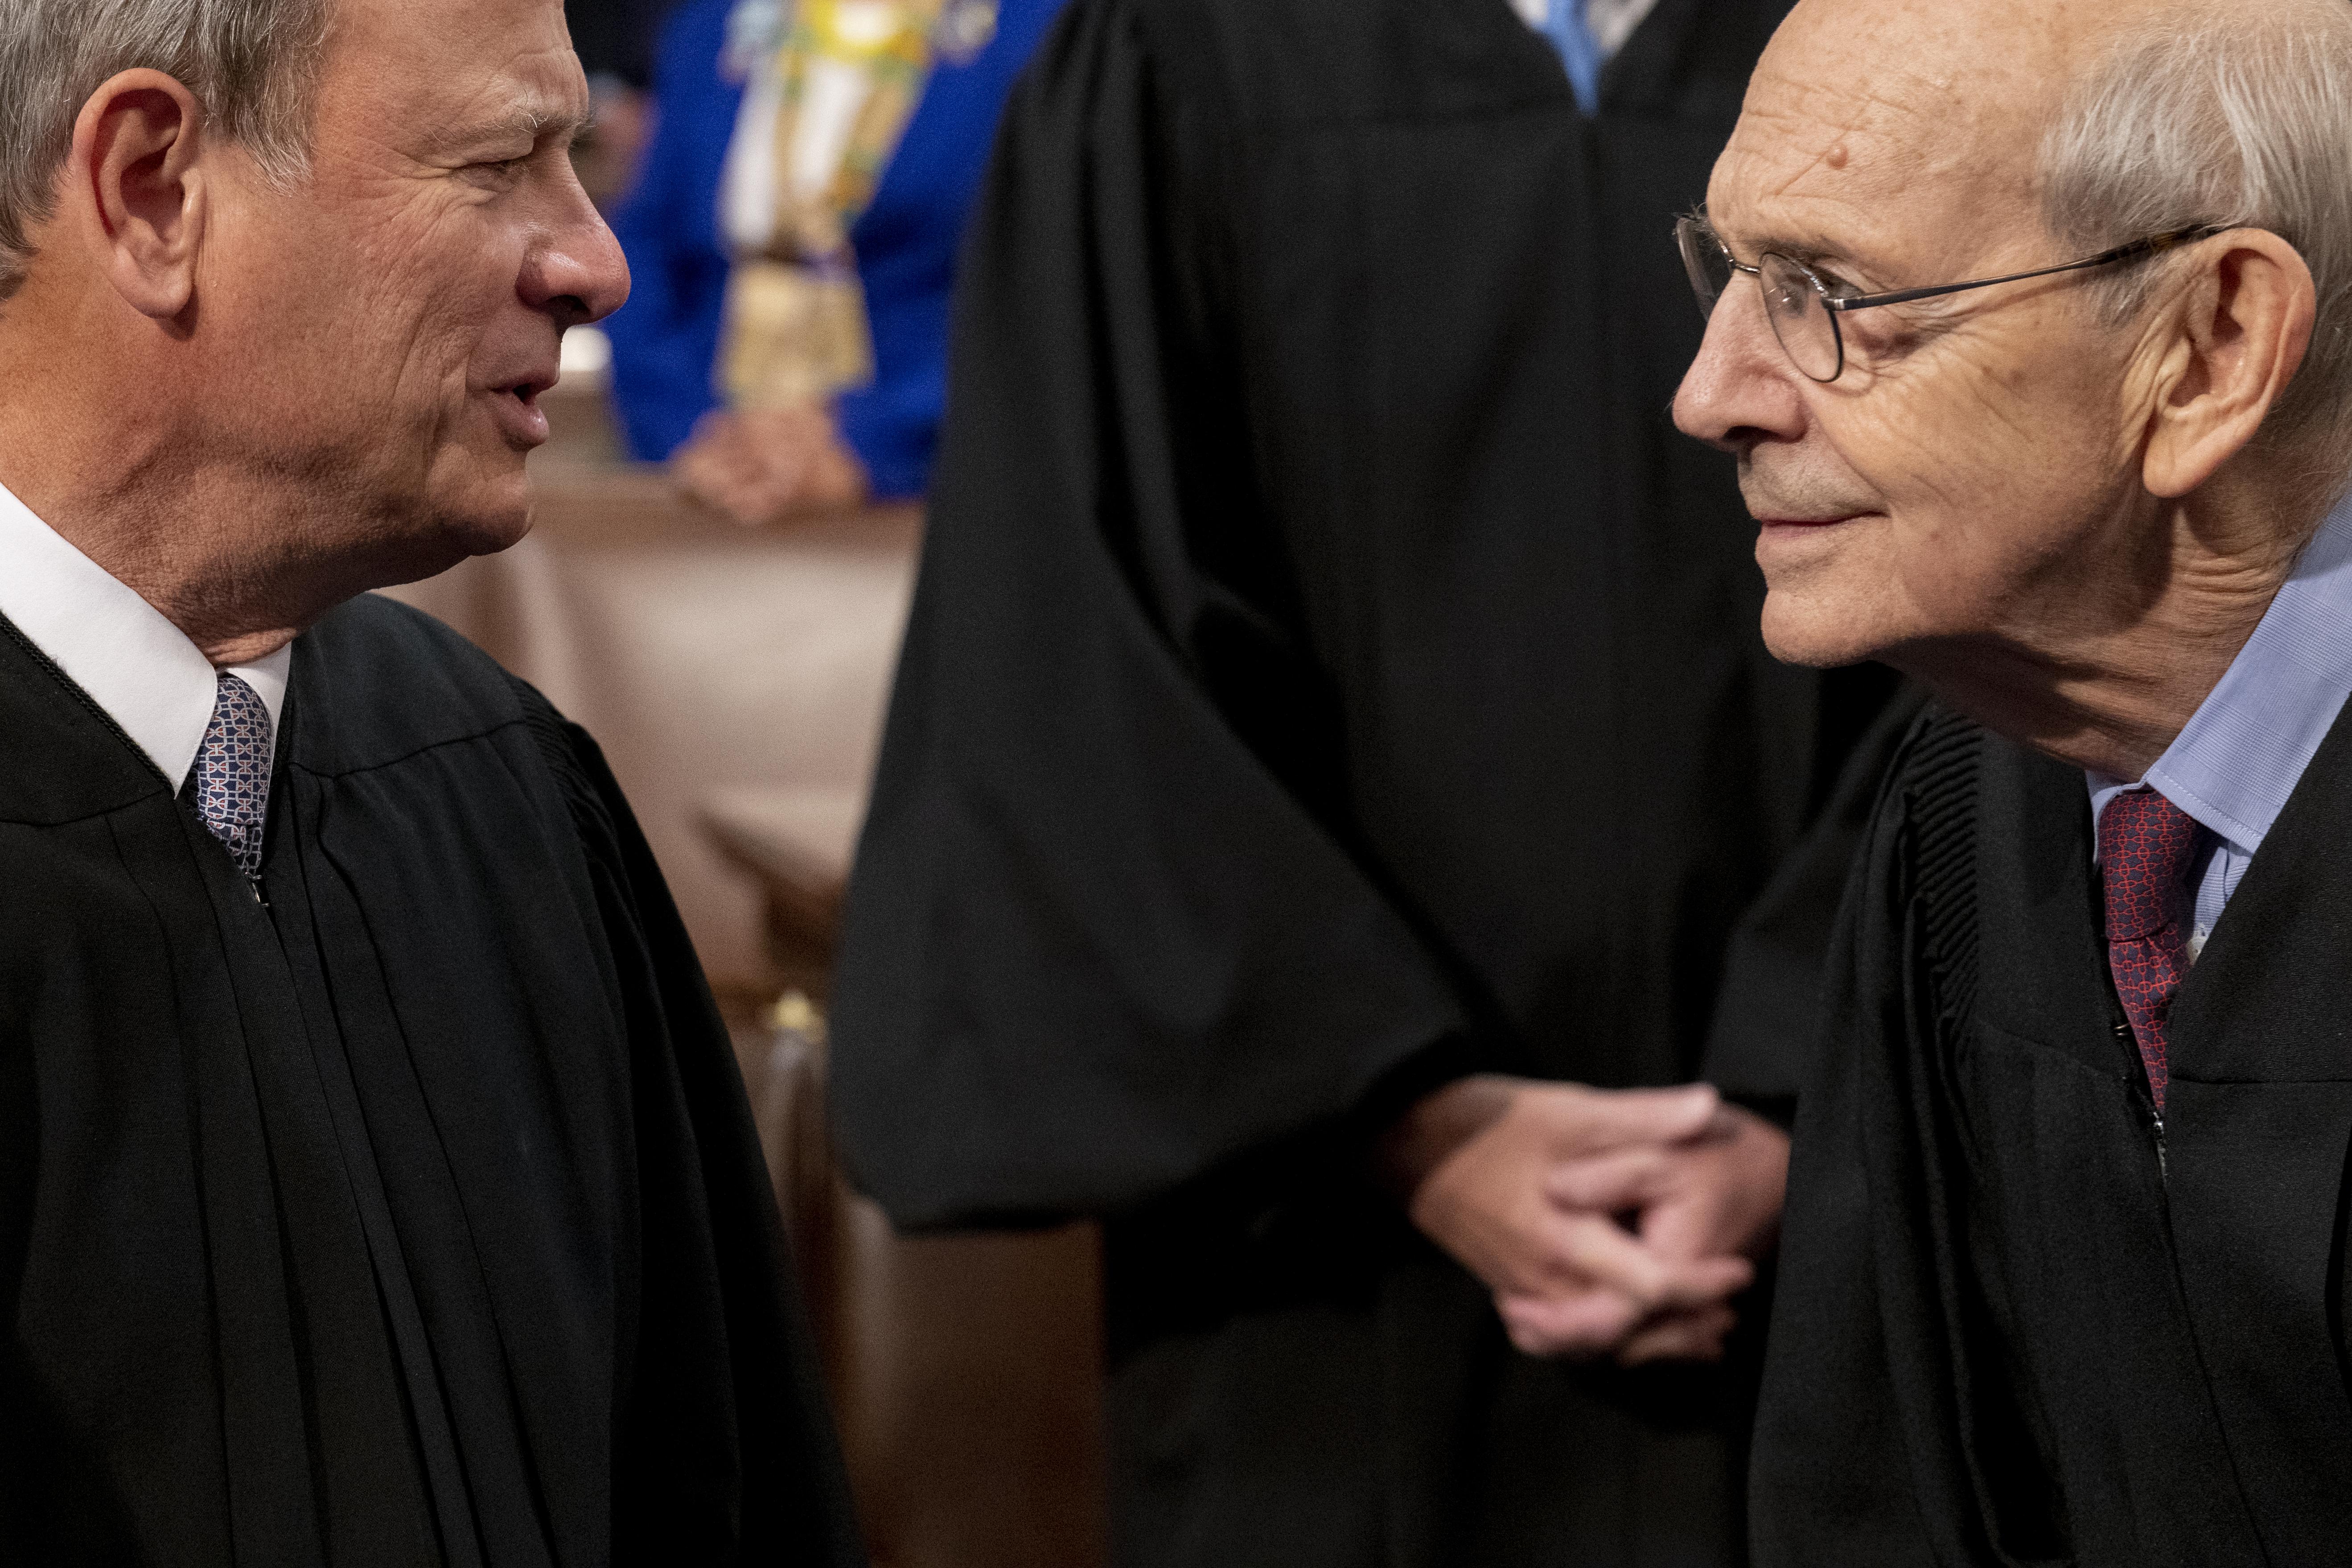 John Roberts and Stephen Breyer confer, leaning in toward each other.